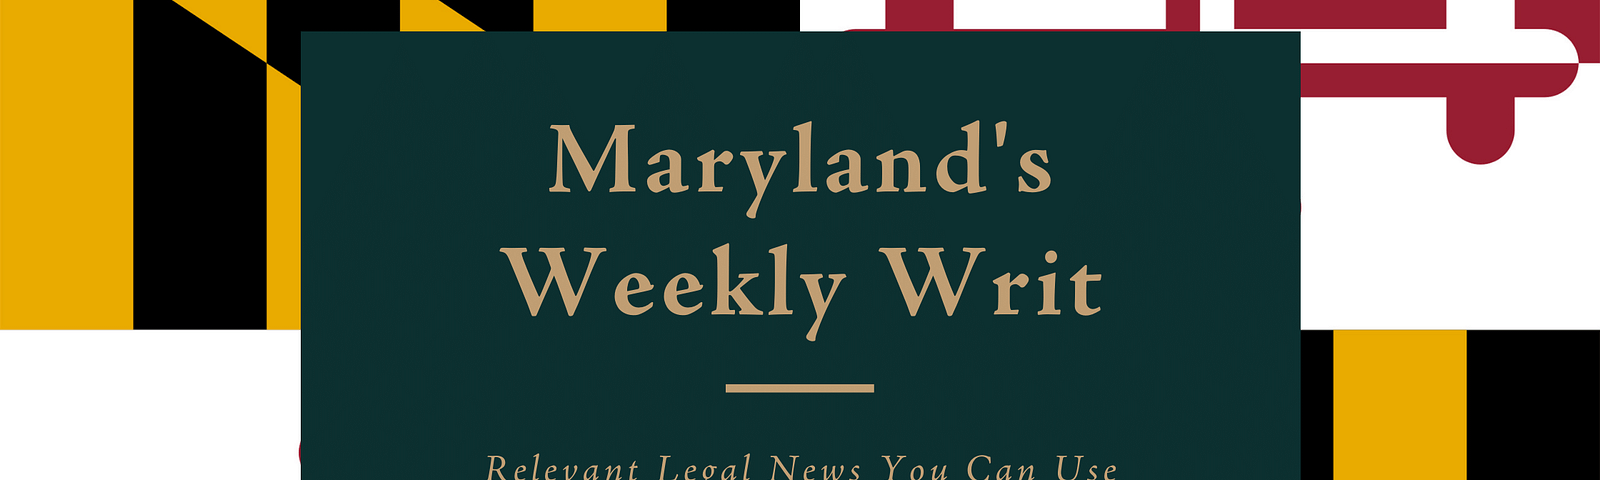 The Weekly Writ: Maryland Legal News You Can Use for July 12, 2021